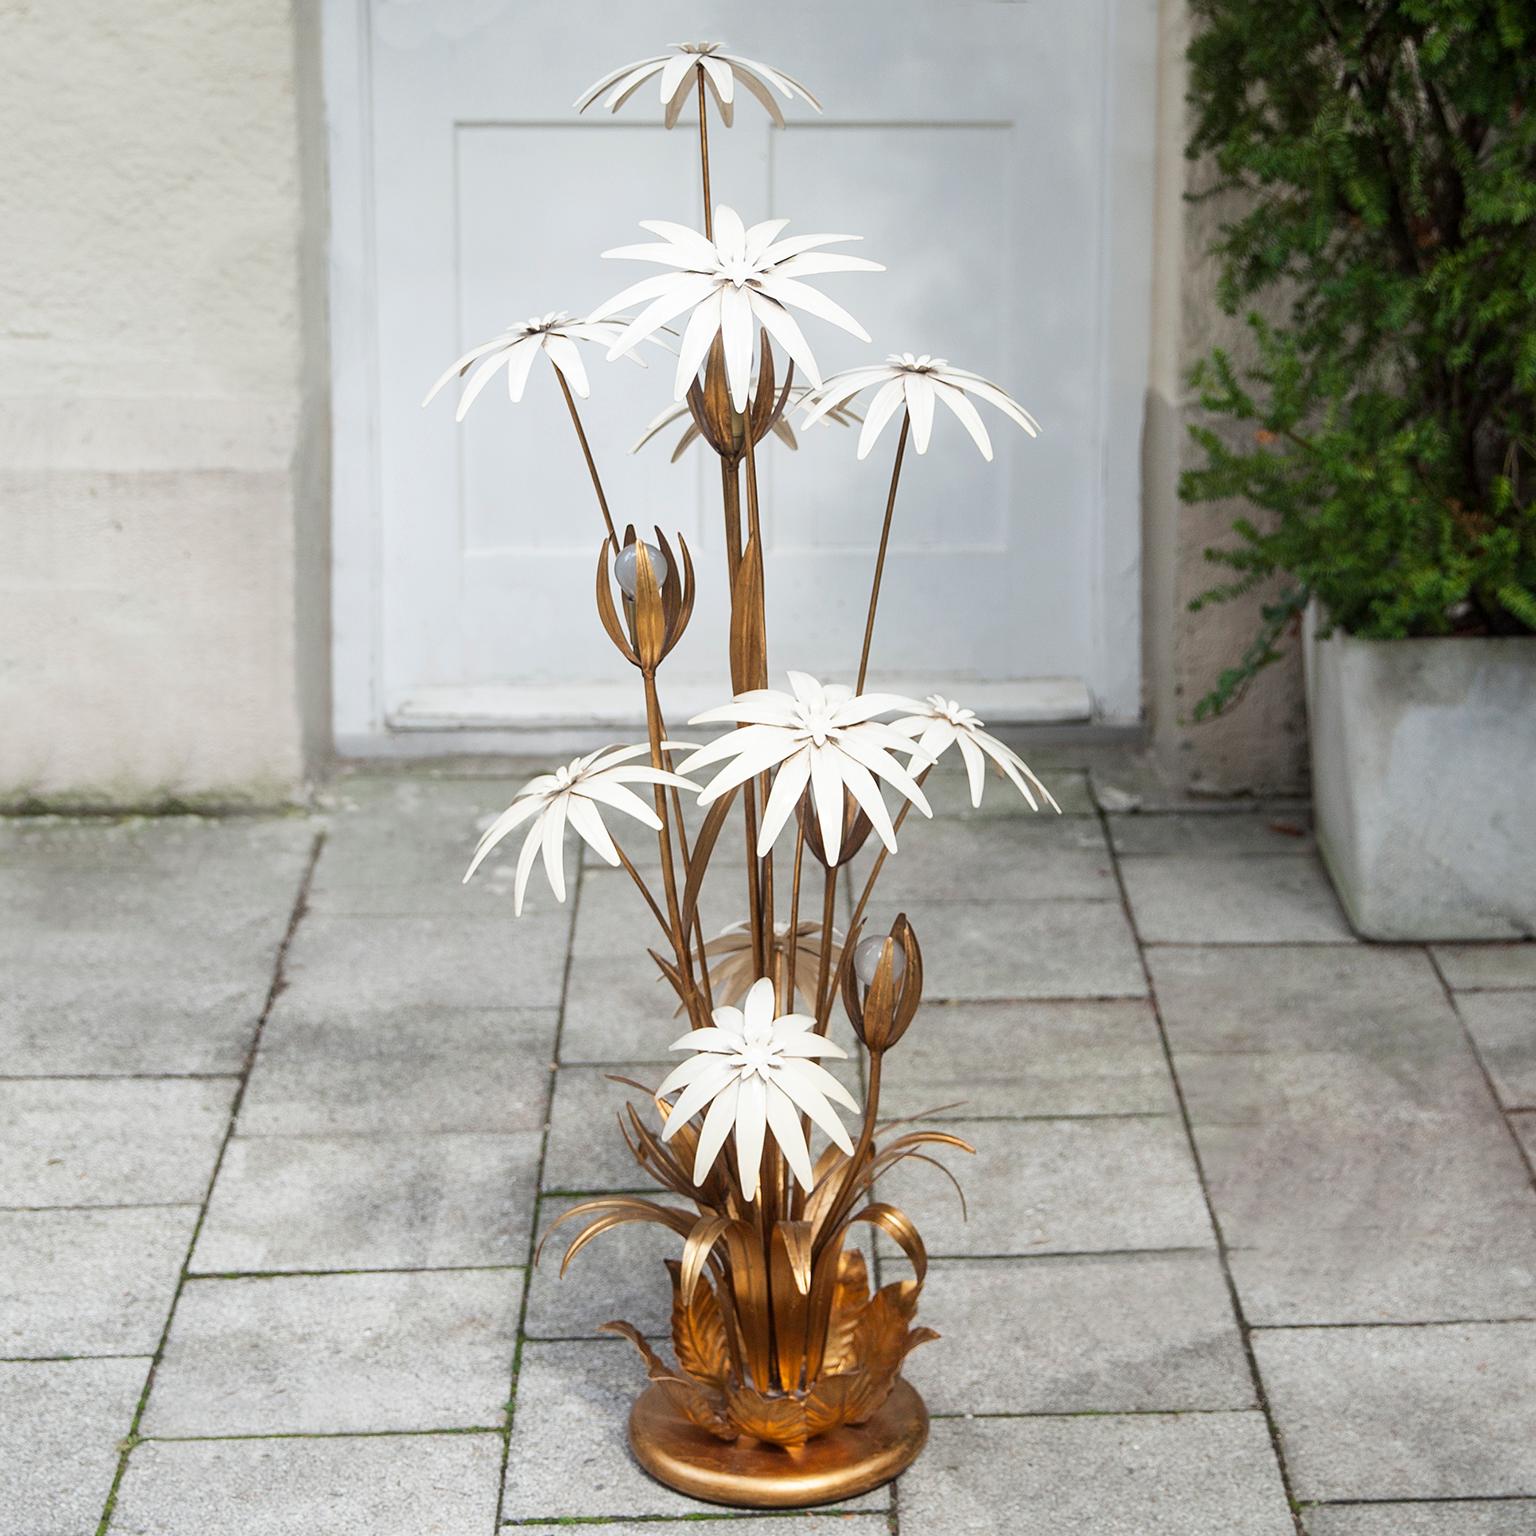 Exotic Hollywood Regency style gilt floral floor lamp. Designed in Germany by Hans Kögl in the 1970s. This classy and rare floor lamp has five lights mounted in beautiful gilded floral metal leaves. Decorated with nine enamel white flowers. With a